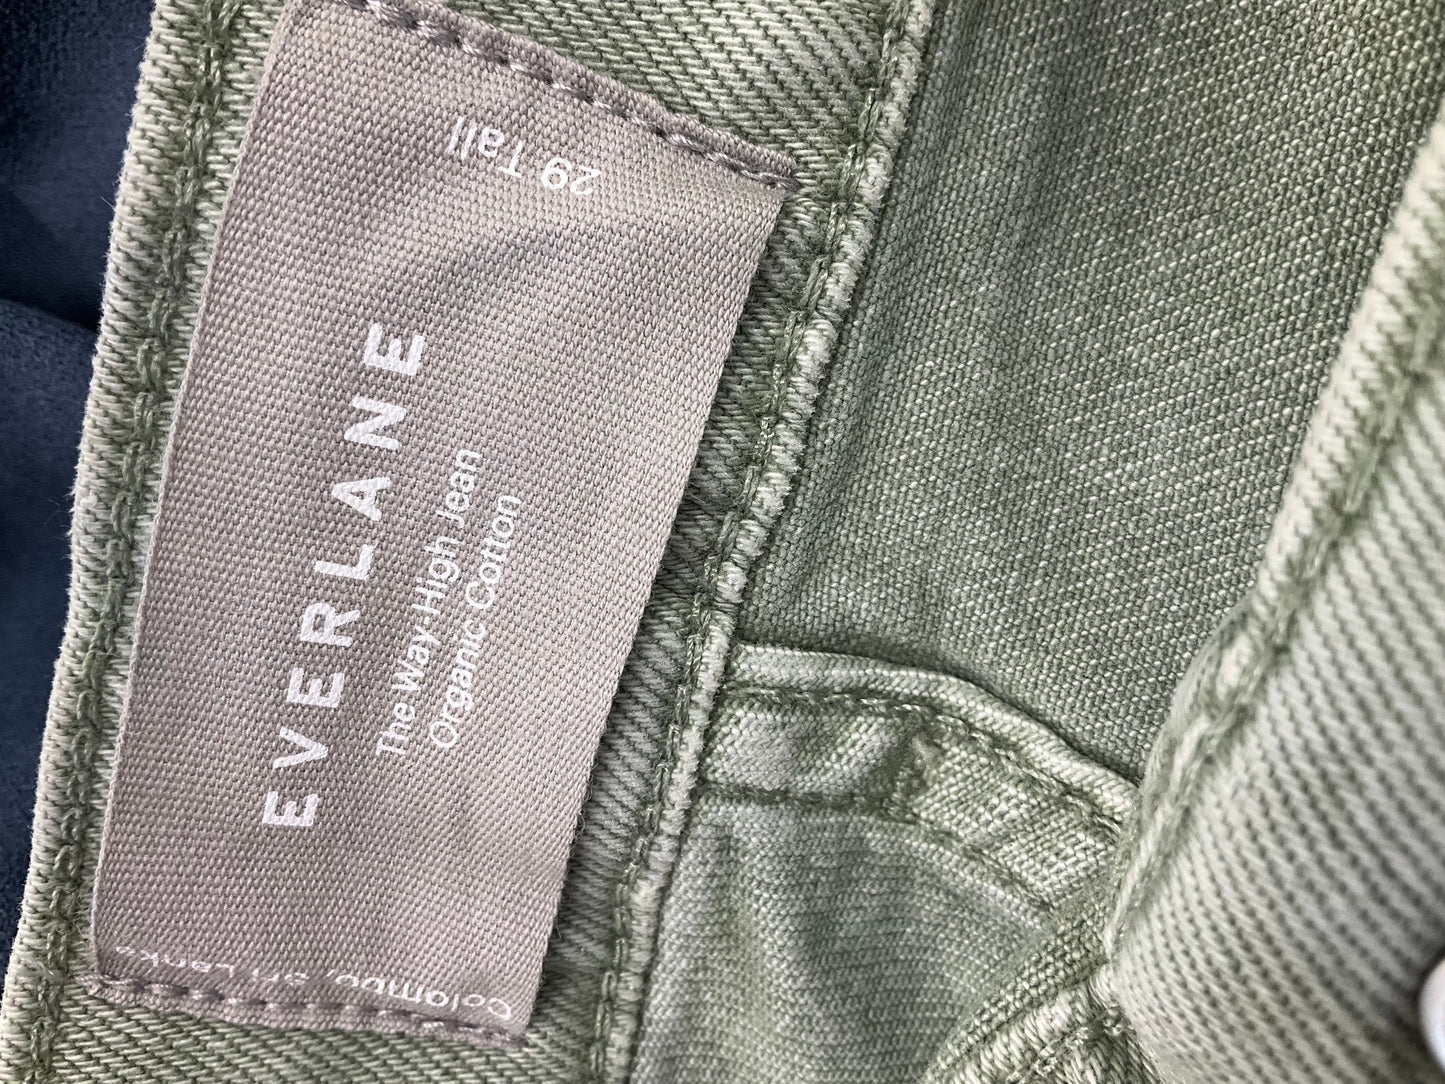 Green Jeans Straight Everlane, Size 6